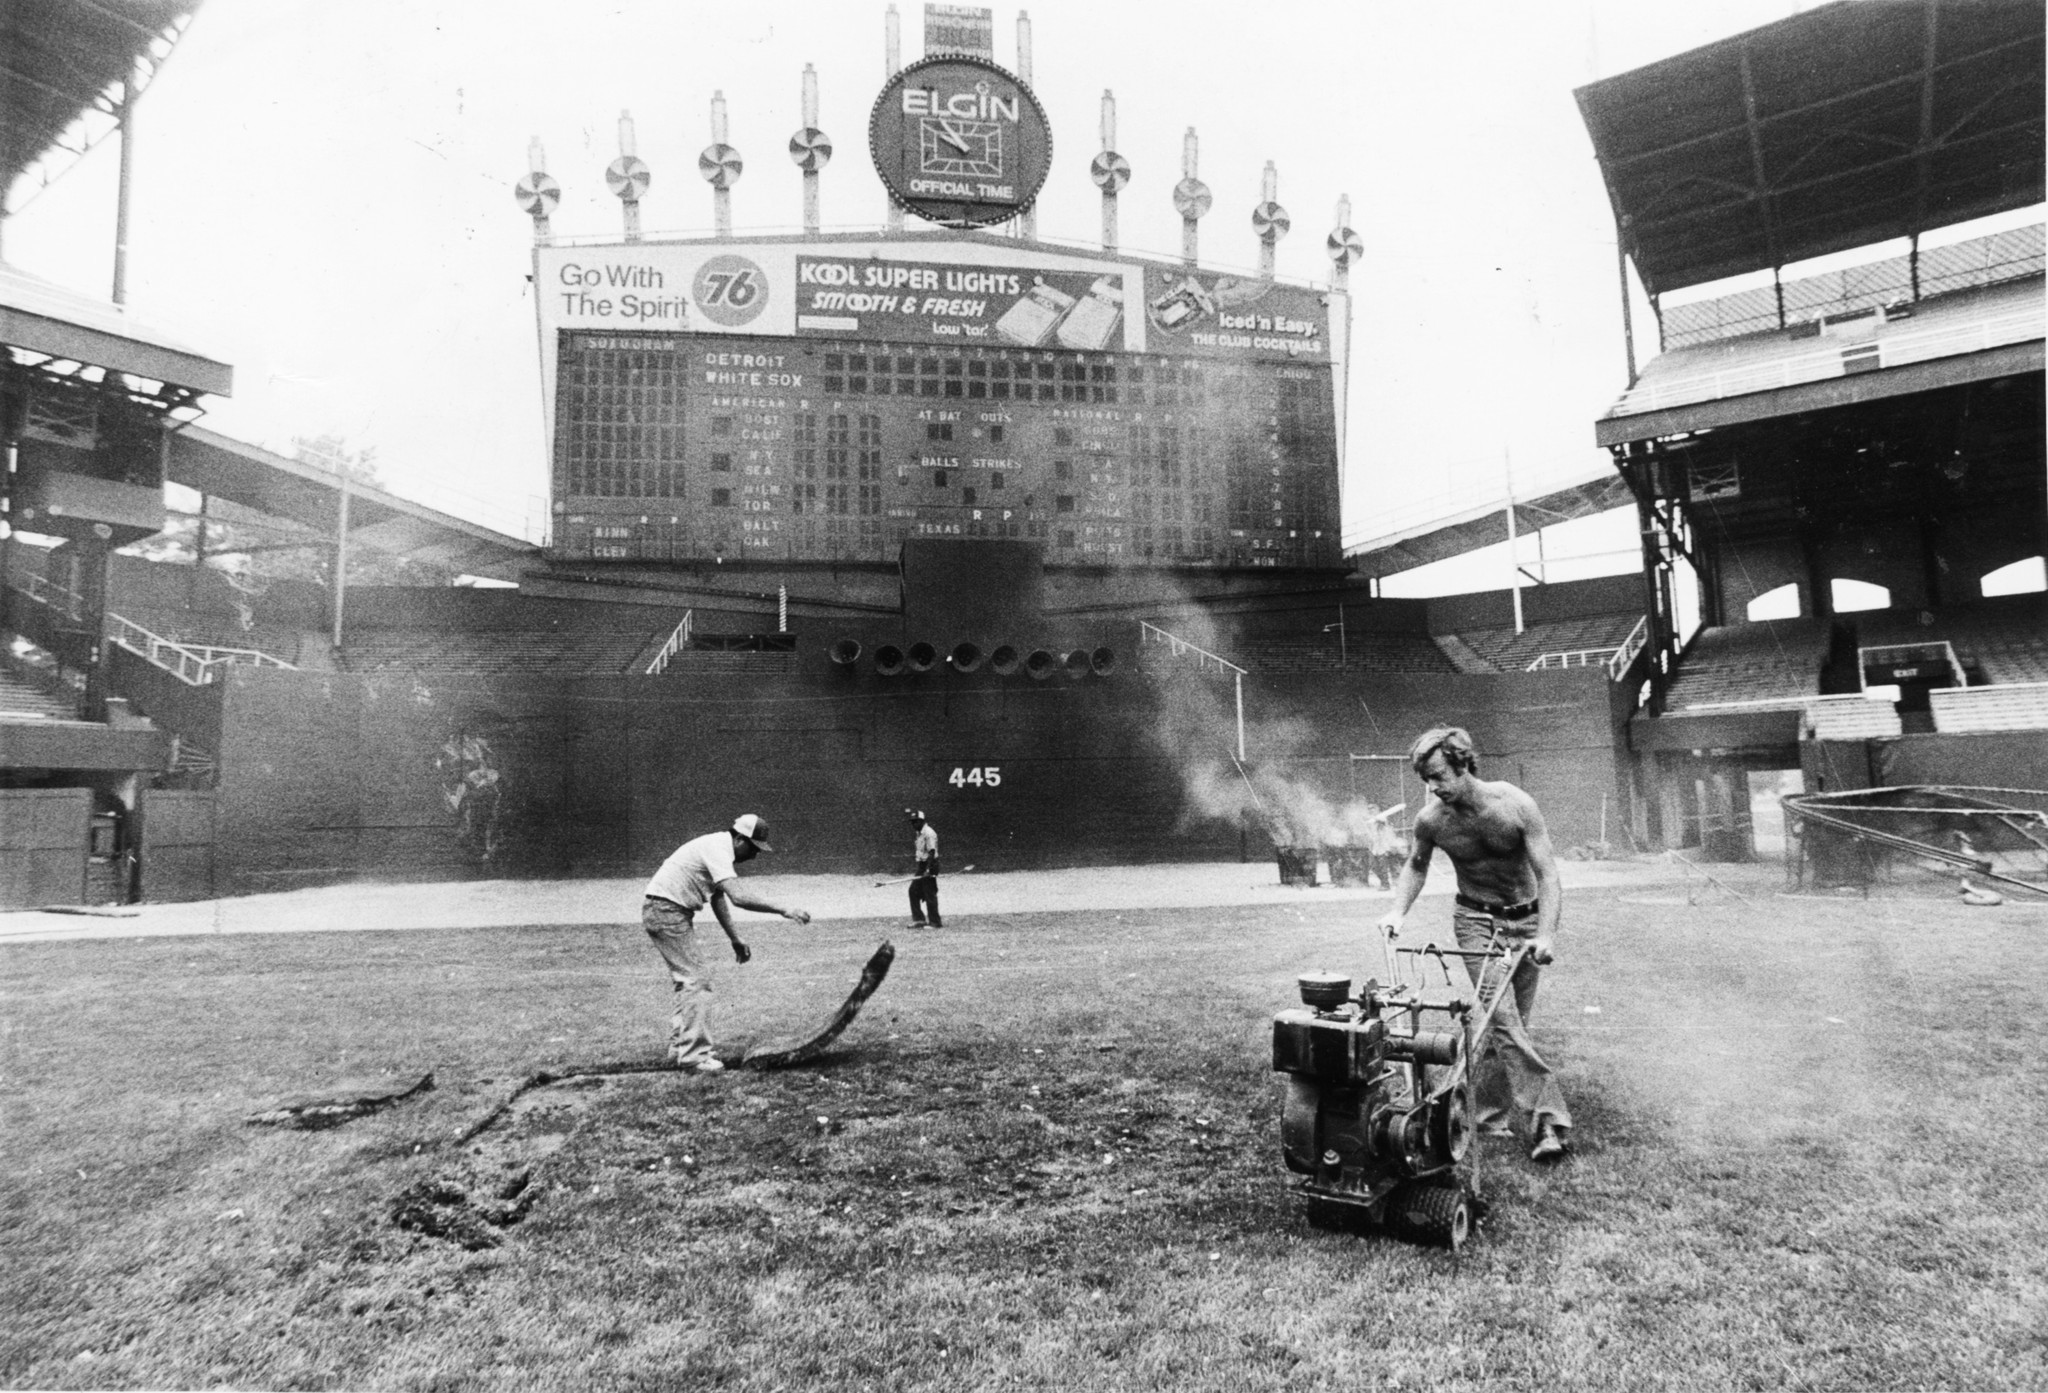 It's the 43rd Anniversary of Disco Demolition Night at Comiskey Park